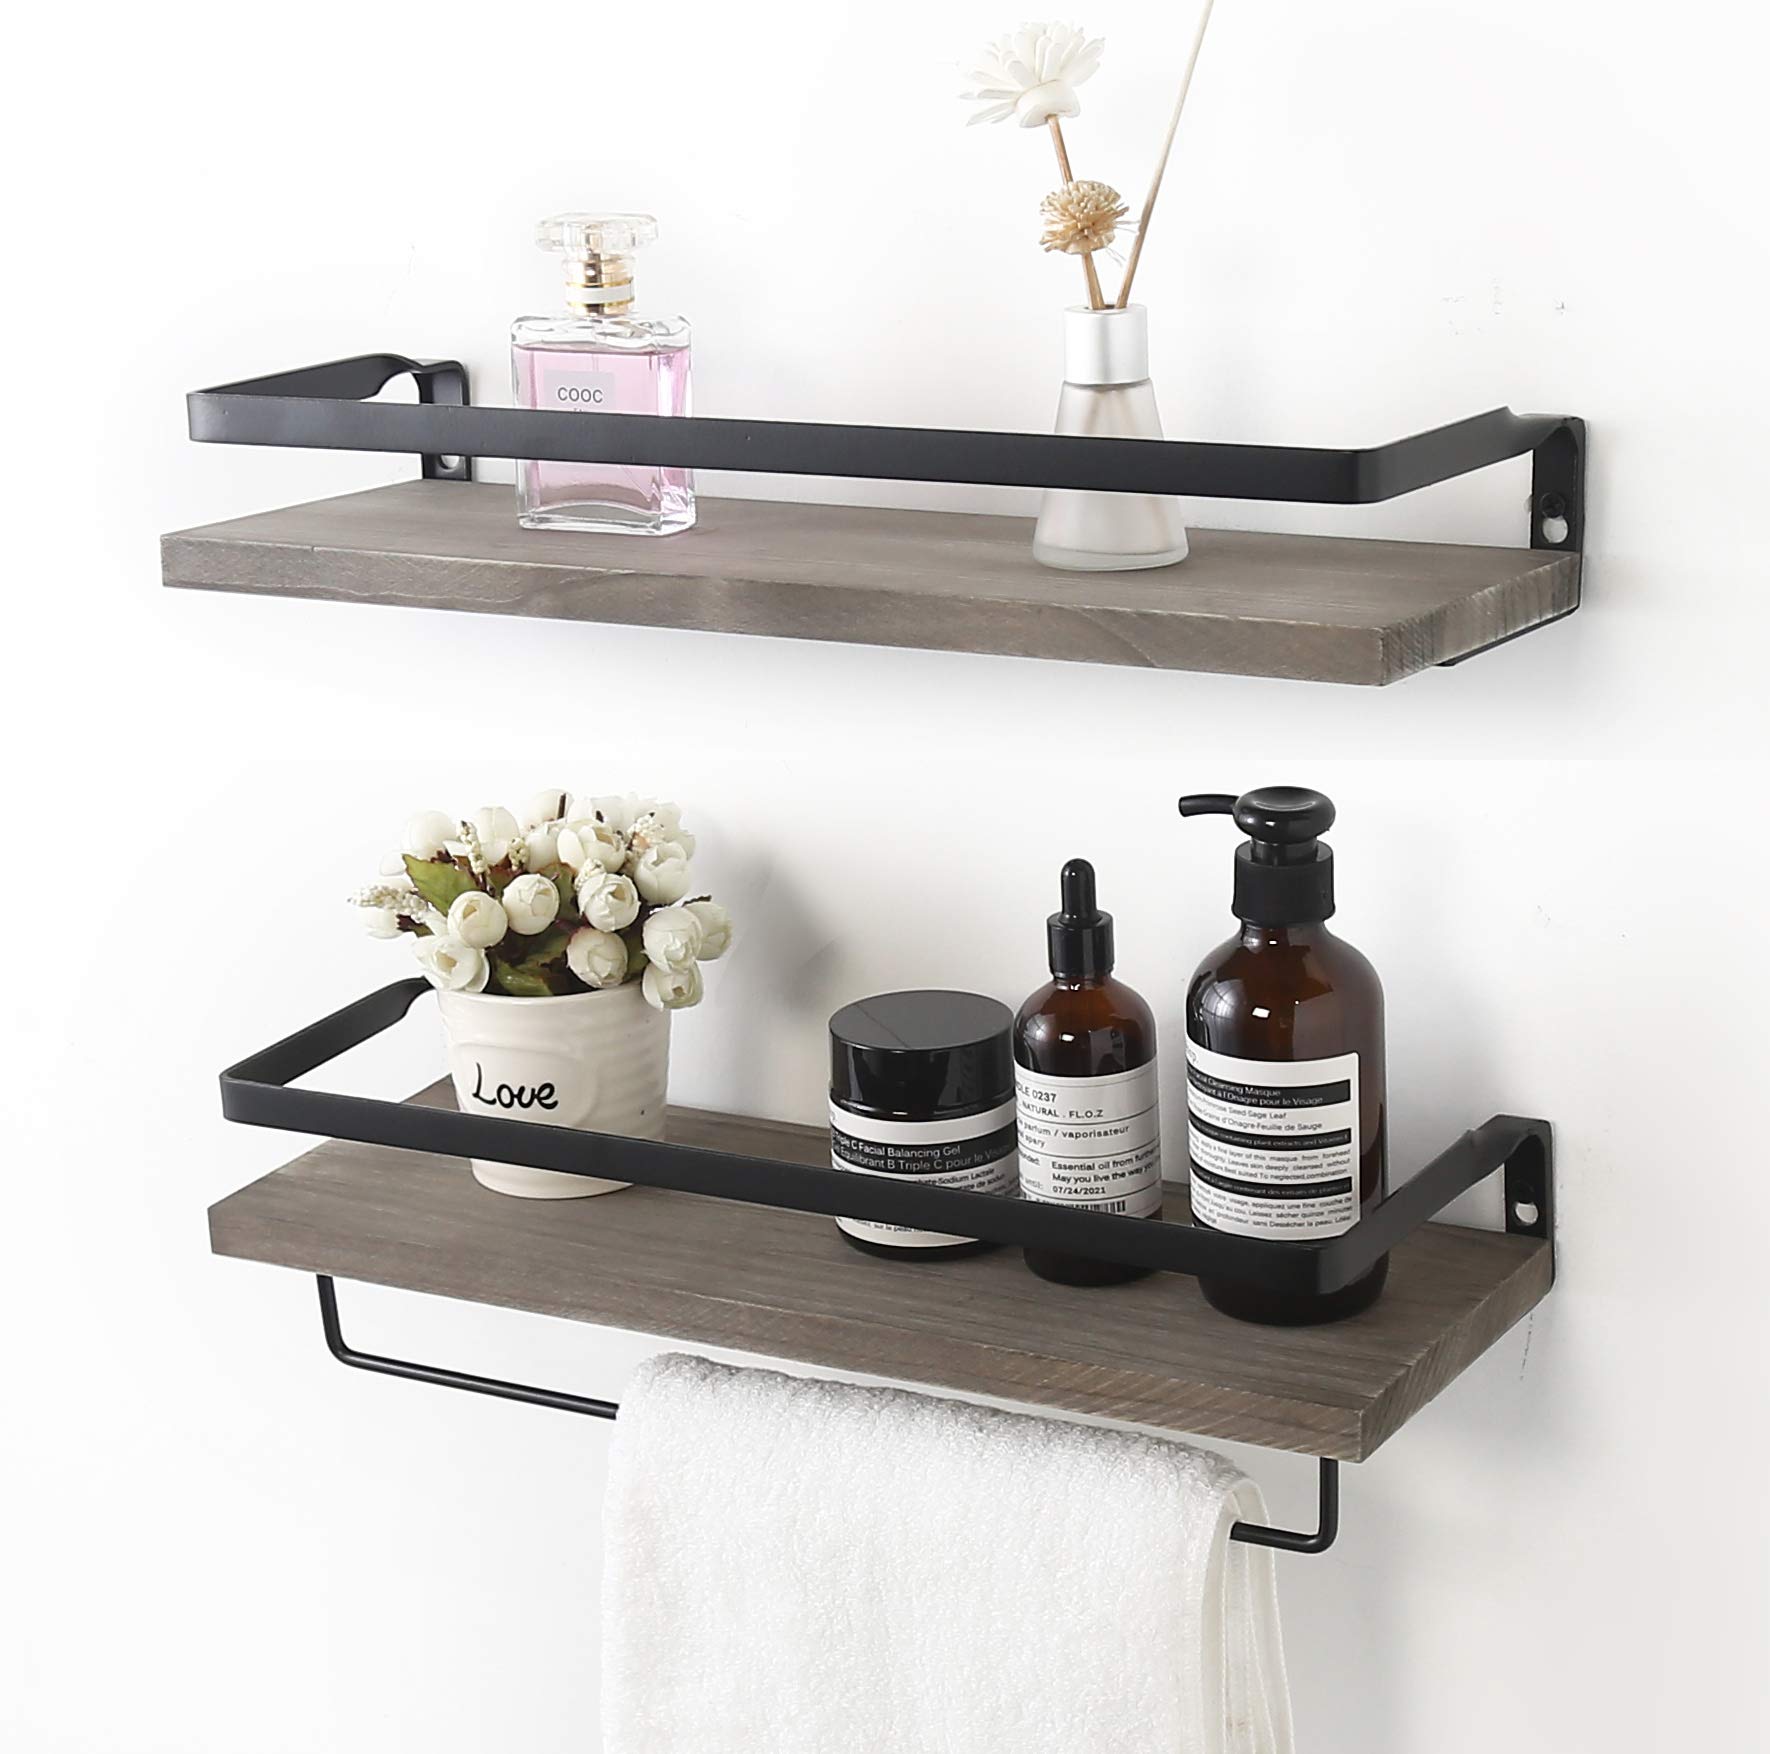 AUTREE Rustic Floating Wall Shelves, Rustic Wood Wall Shelves Storage Set